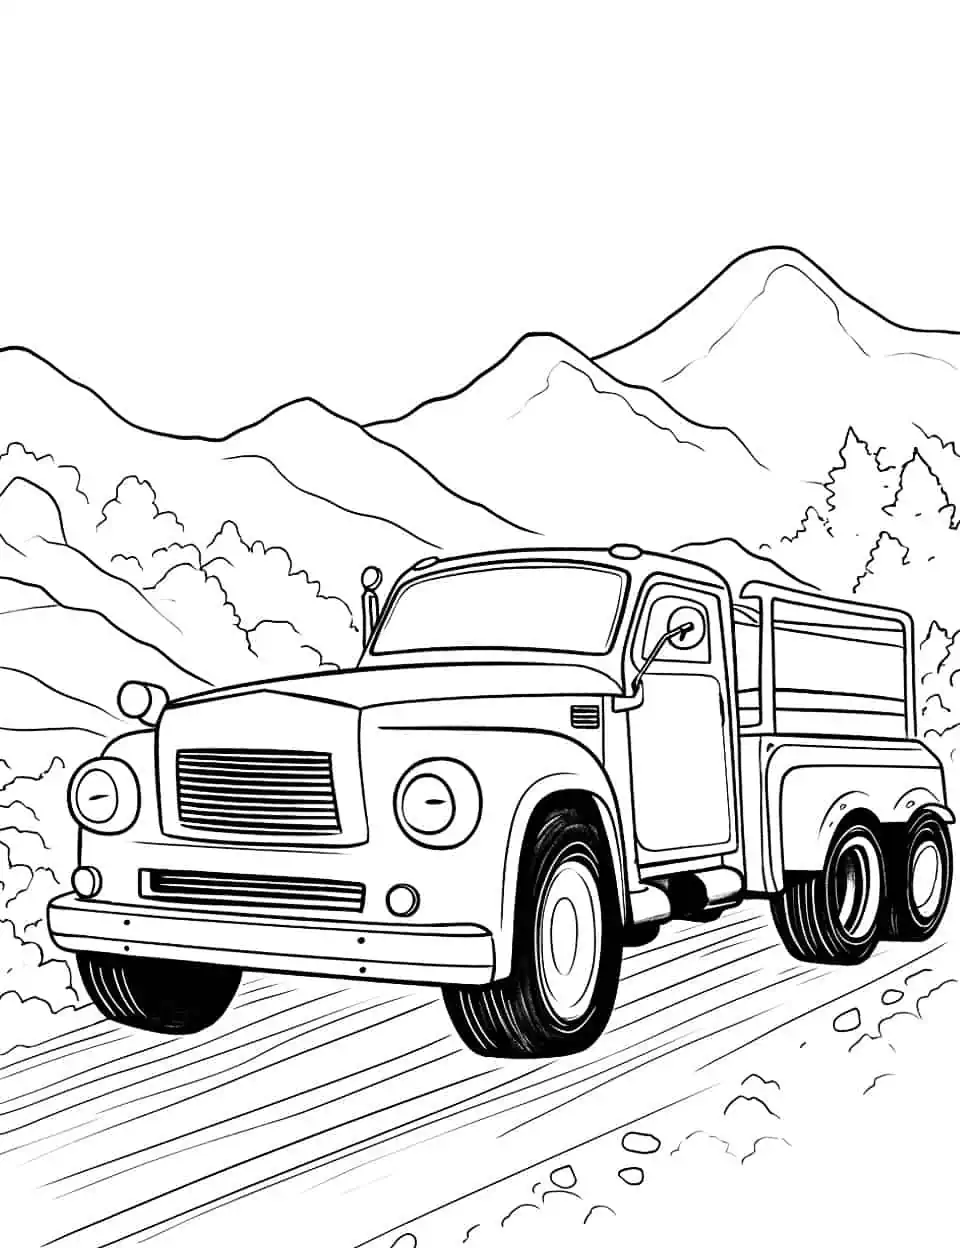 Car coloring pages free printable sheets